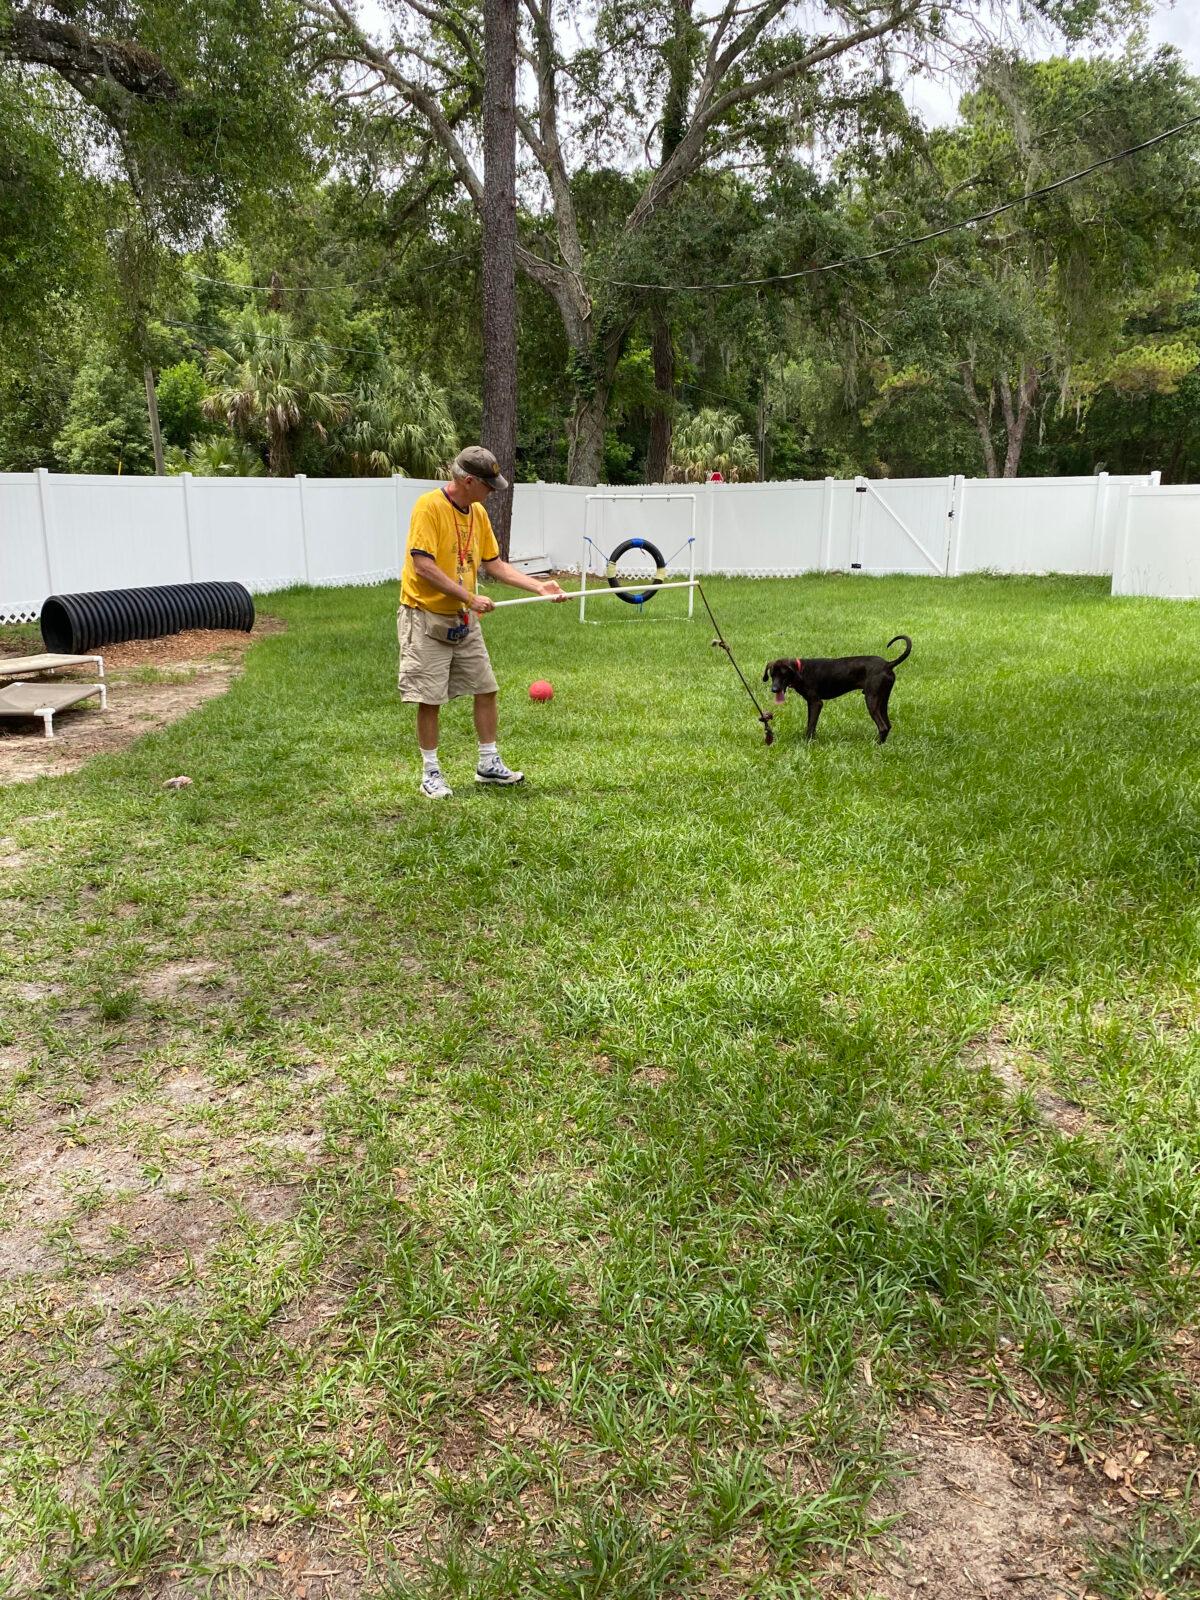 Ben Moser, a volunteer at the Humane Society of the Nature Coast in Brooksville, Fla., plays with one of the shelter dogs in an outdoor enclosure on May 27, 2022. (Patricia Tolson/The Epoch Times)